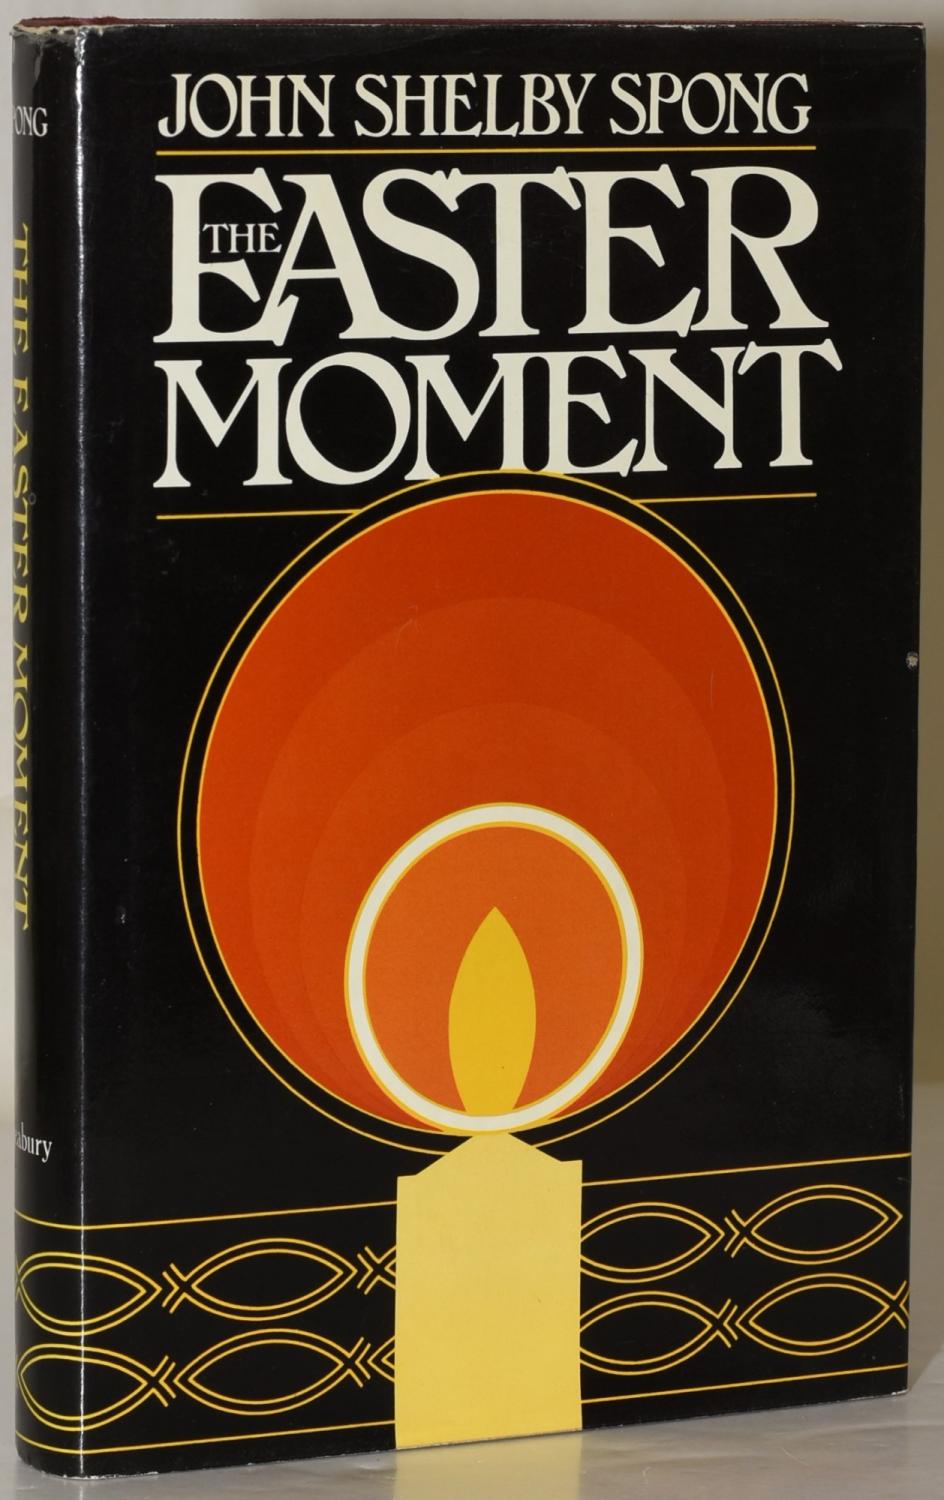 THE EASTER MOMENT (Signed; First Edition) - Spong, John Shelby